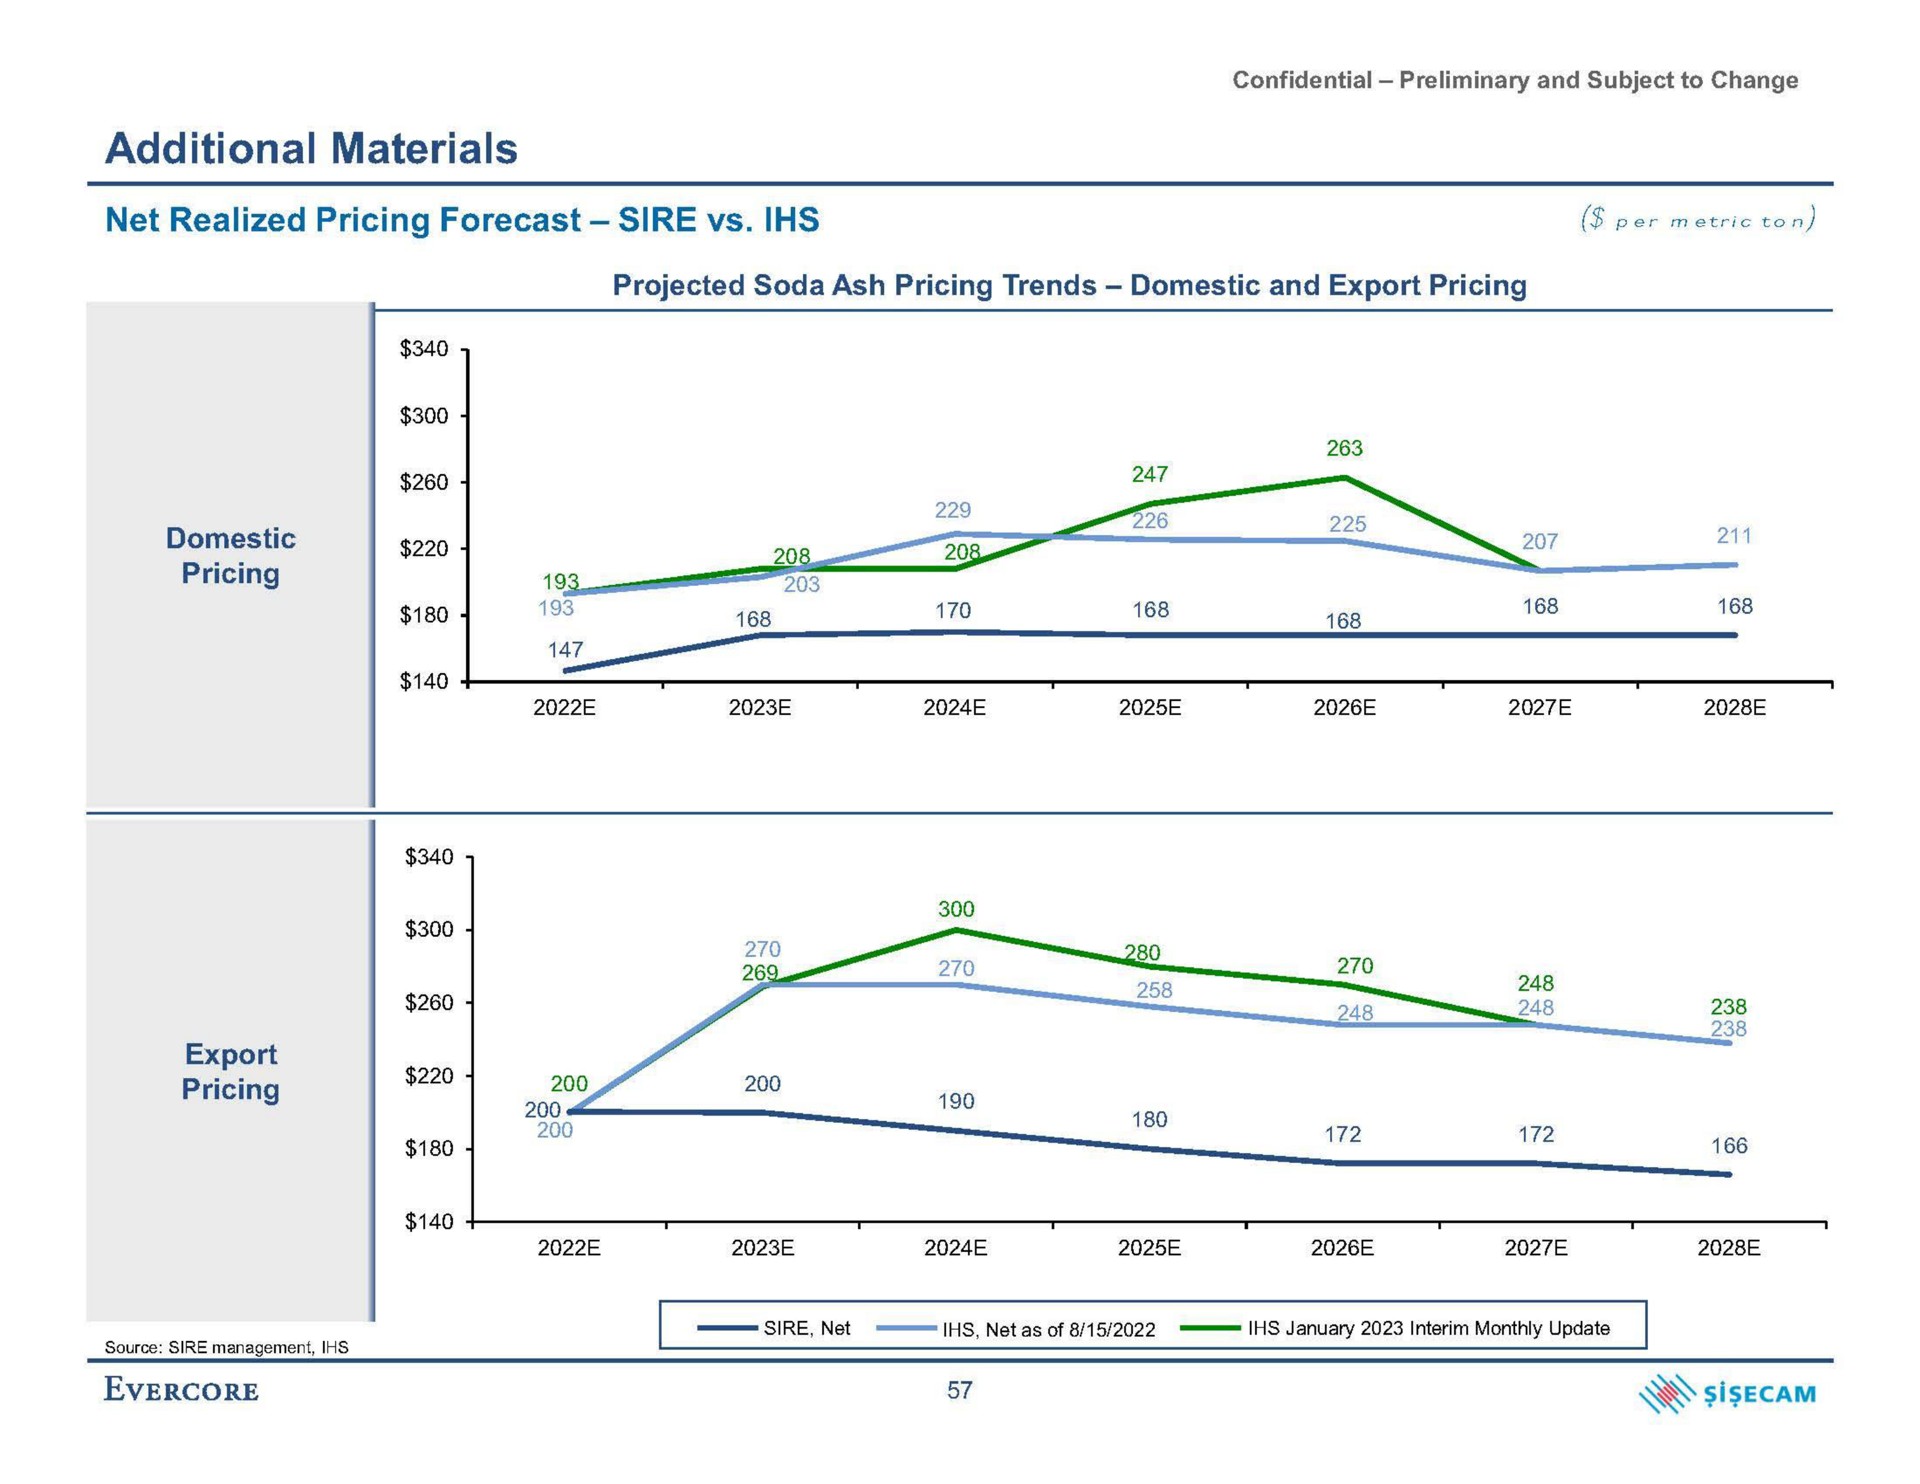 additional materials net realized pricing forecast sire per metric ton | Evercore